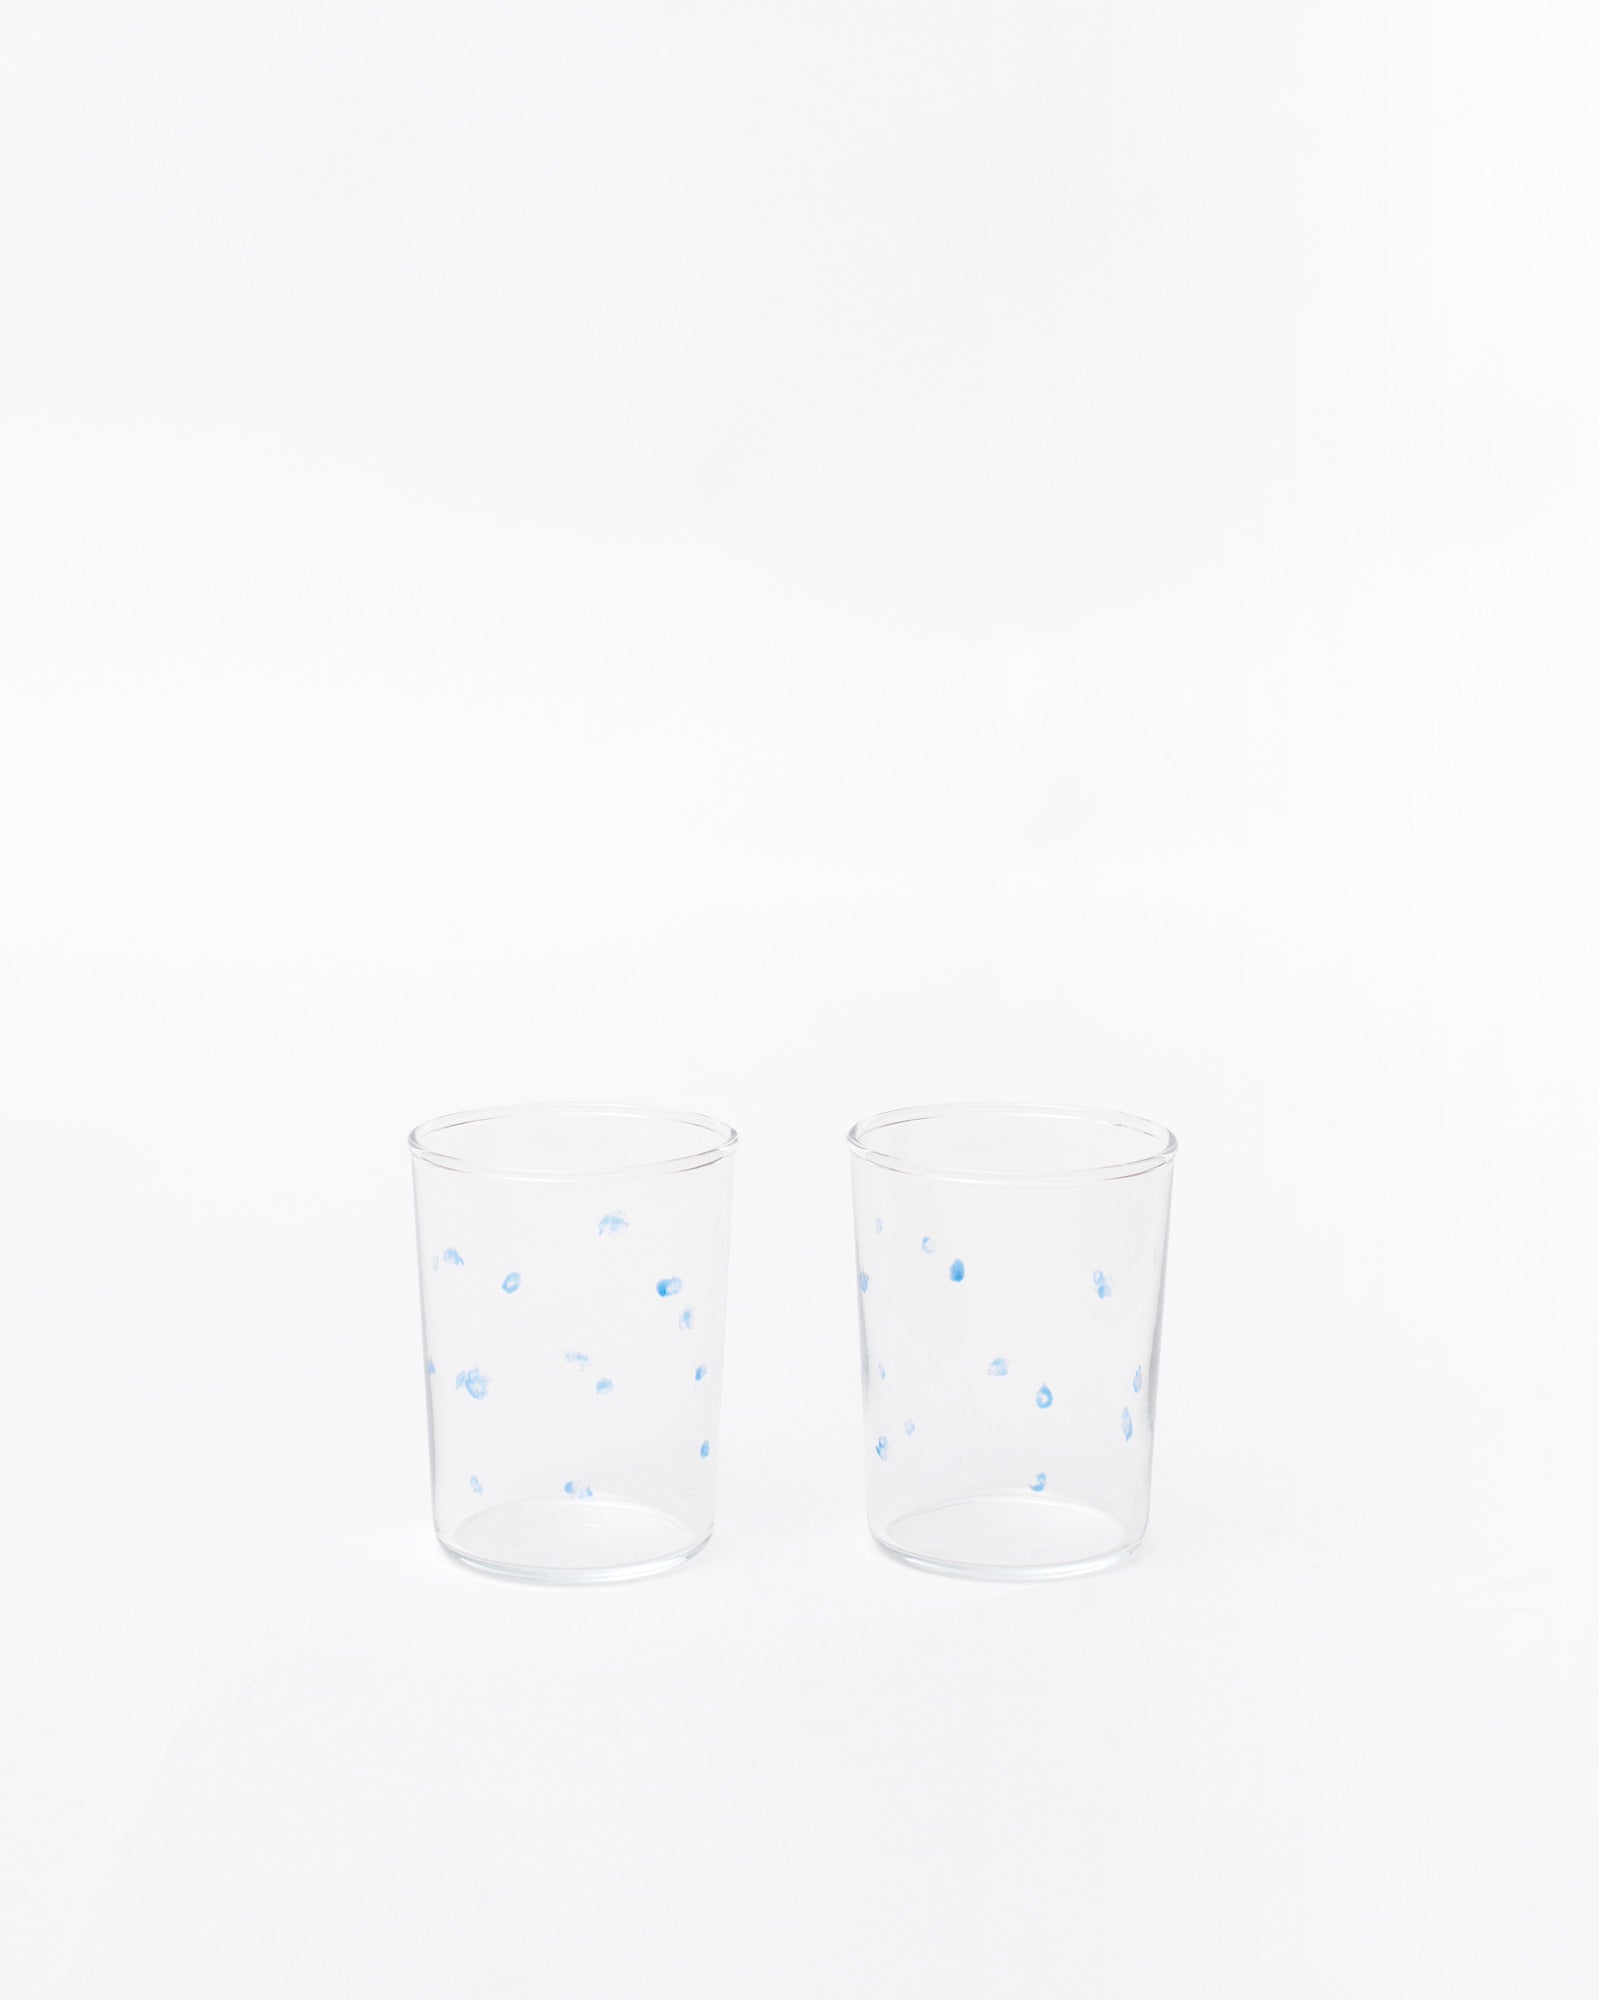 Two glasses with handmade dotted design next to each other on a white background